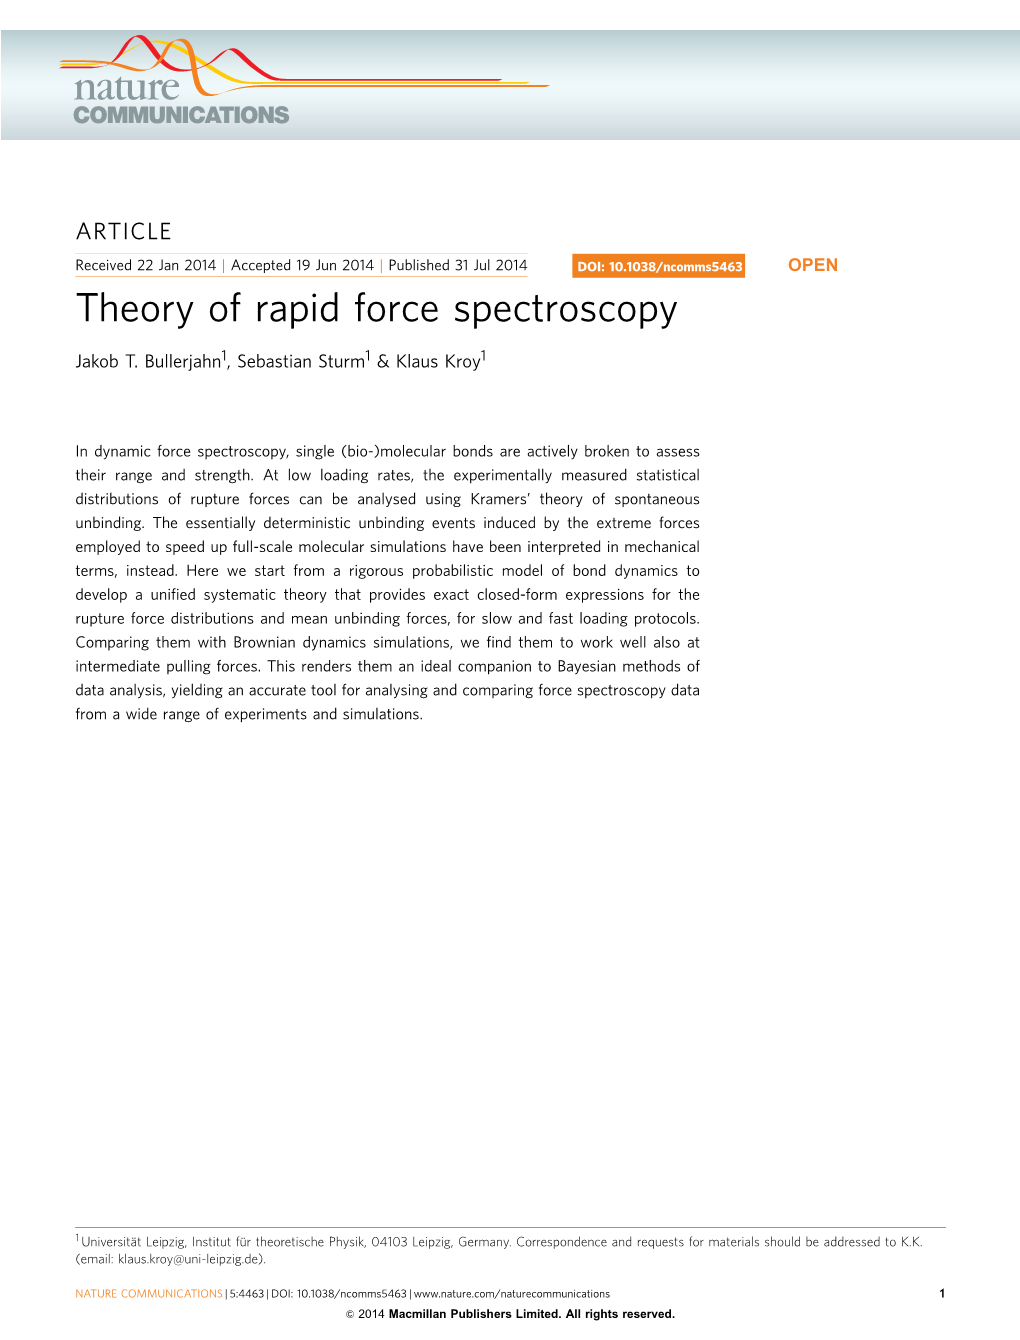 Theory of Rapid Force Spectroscopy